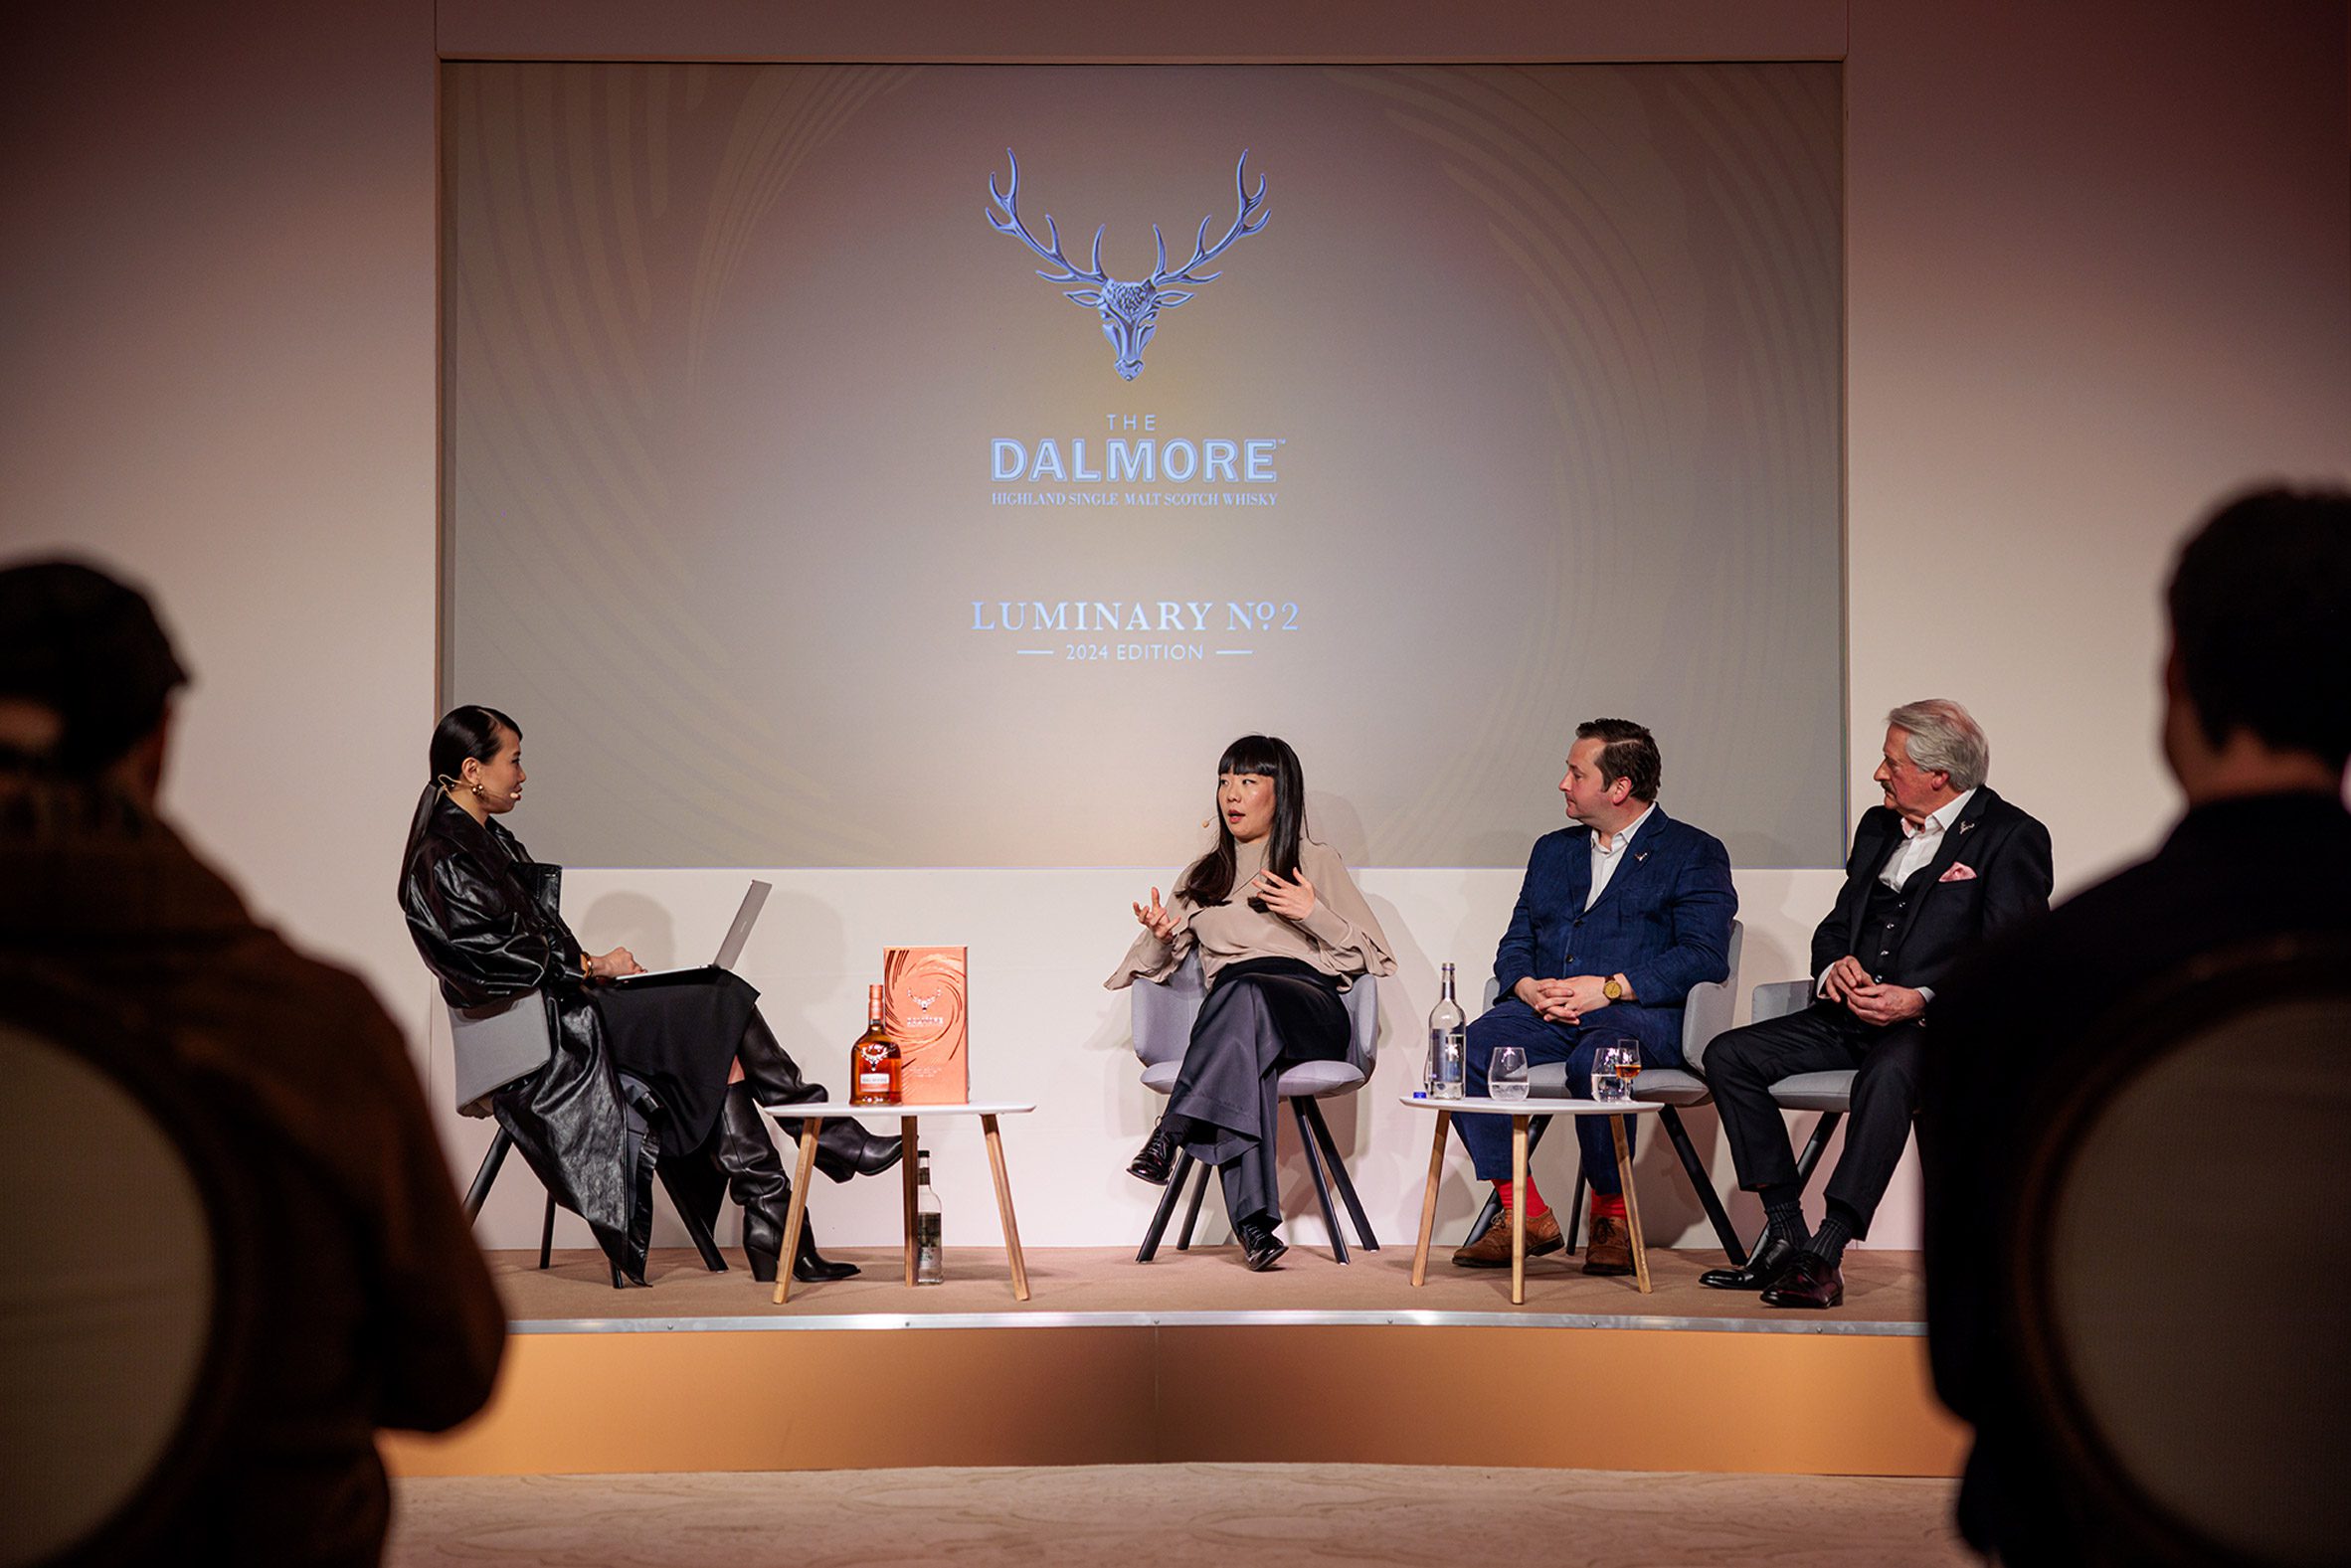 Melodie Leung of Zaha Hadid Architects collaborates with The Dalmore